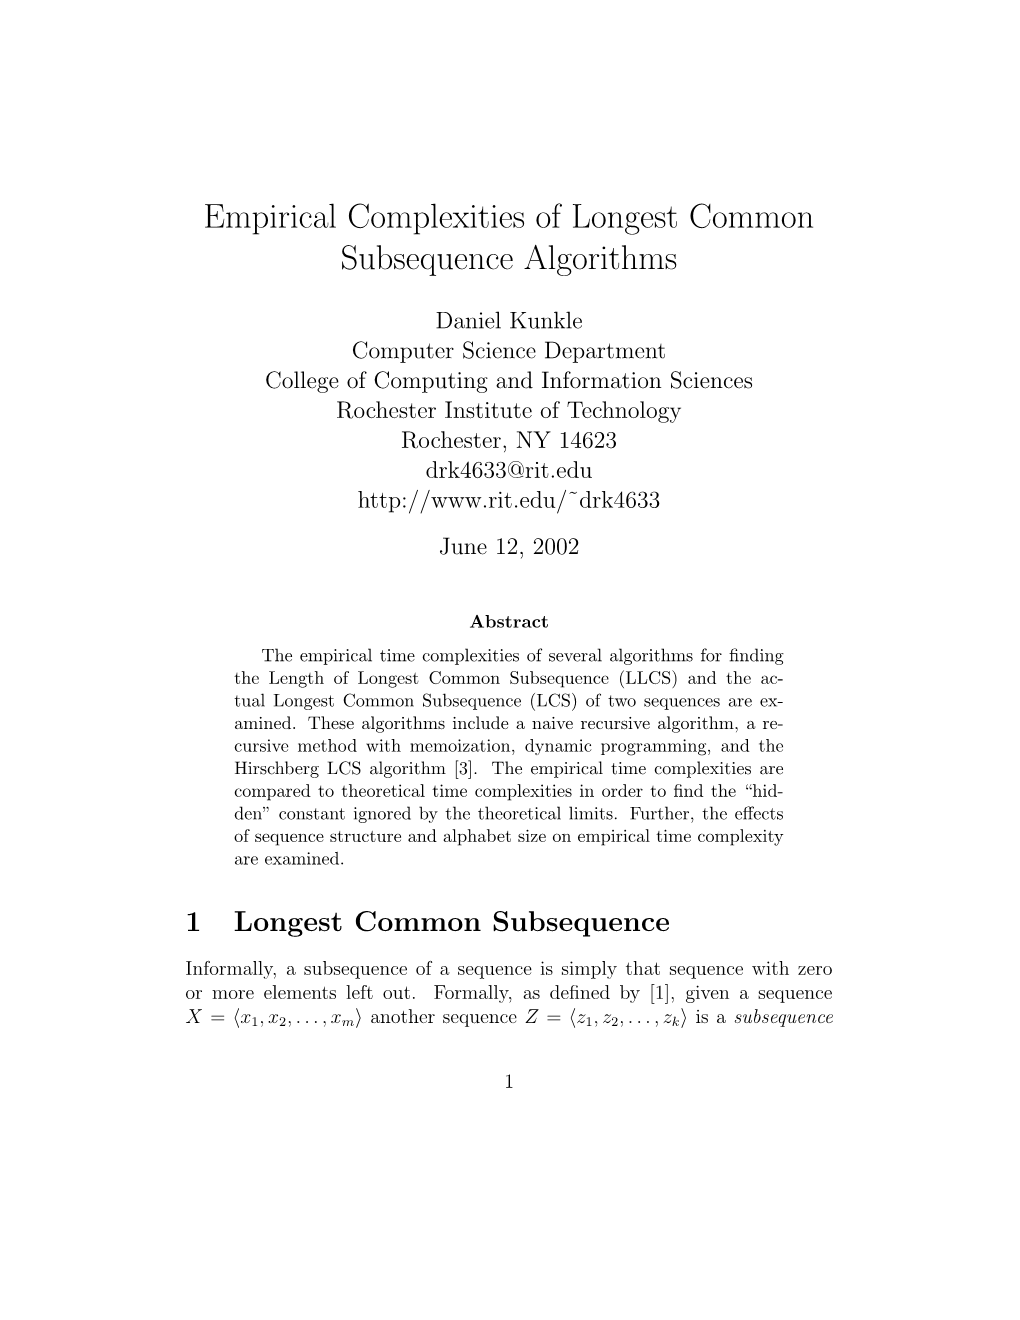 Empirical Complexities of Longest Common Subsequence Algorithms